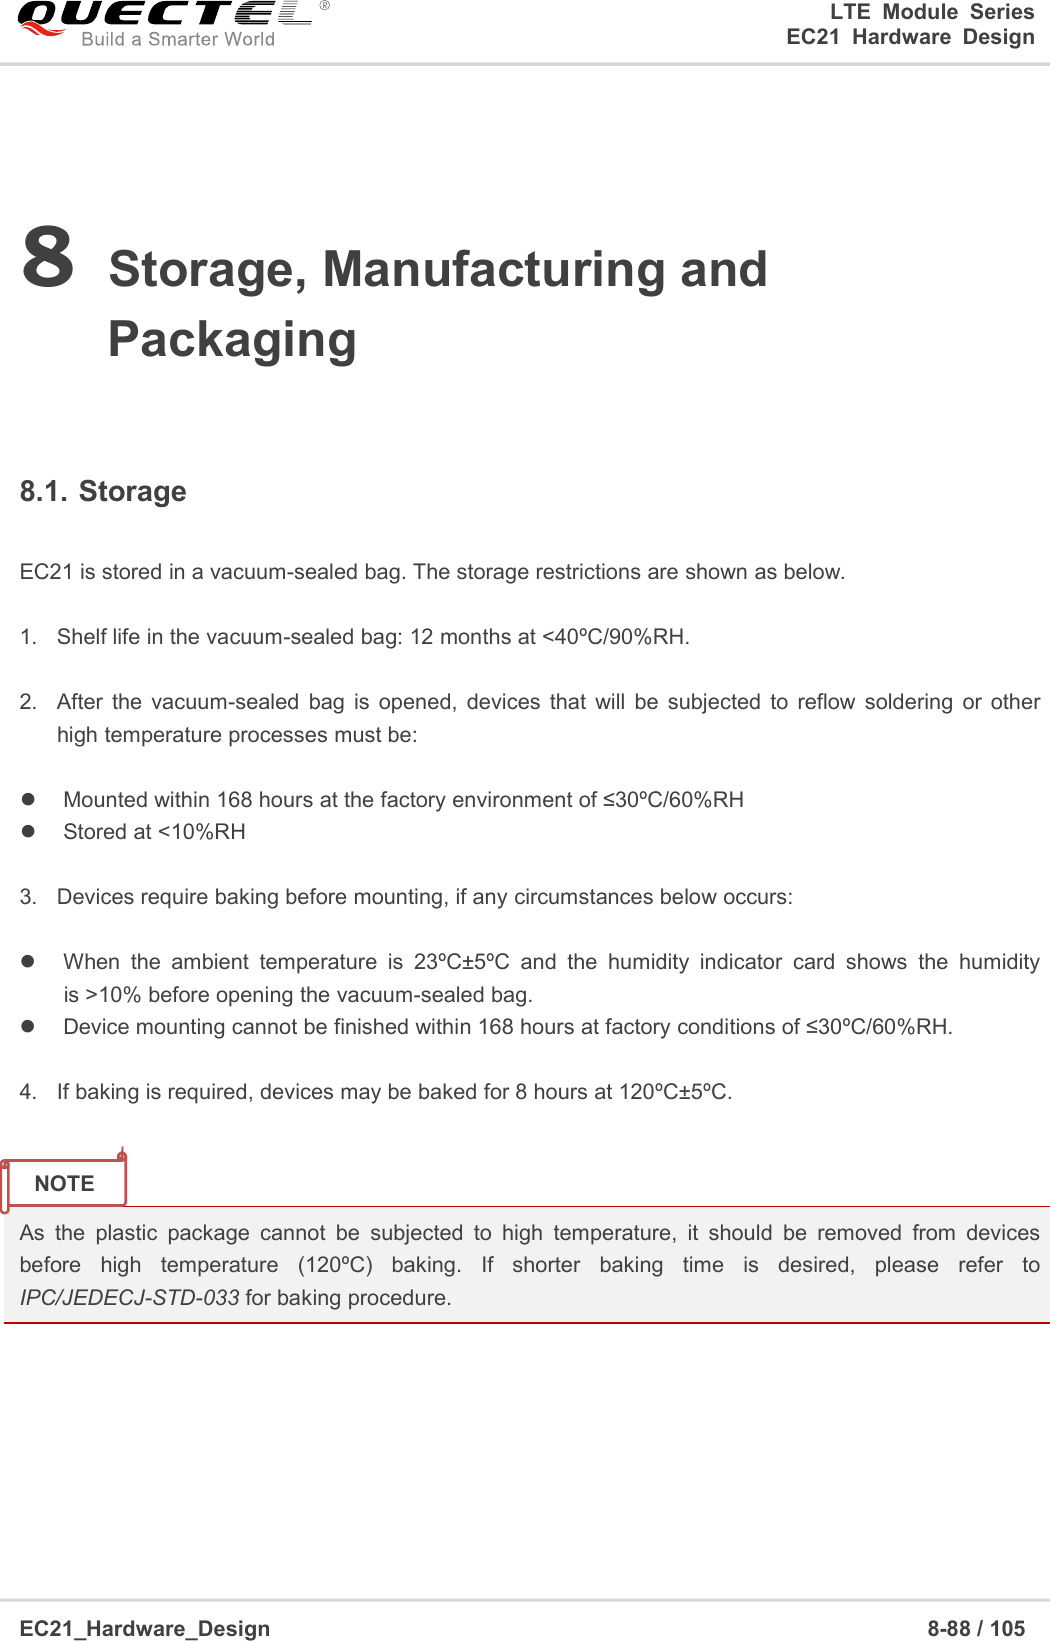 LTE Module SeriesEC21 Hardware DesignEC21_Hardware_Design 8-88 / 1058Storage, Manufacturing andPackaging8.1. StorageEC21 is stored in a vacuum-sealed bag. The storage restrictions are shown as below.1. Shelf life in the vacuum-sealed bag: 12 months at &lt;40ºC/90%RH.2. After the vacuum-sealed bag is opened, devices that will be subjected to reflow soldering or otherhigh temperature processes must be:Mounted within 168 hours at the factory environment of ≤30ºC/60%RHStored at &lt;10%RH3. Devices require baking before mounting, if any circumstances below occurs:When the ambient temperature is 23ºC±5ºC and the humidity indicator card shows the humidityis &gt;10% before opening the vacuum-sealed bag.Device mounting cannot be finished within 168 hours at factory conditions of ≤30ºC/60%RH.4. If baking is required, devices may be baked for 8 hours at 120ºC±5ºC.As the plastic package cannot be subjected to high temperature, it should be removed from devicesbefore high temperature (120ºC) baking. If shorter baking time is desired, please refer toIPC/JEDECJ-STD-033 for baking procedure.NOTE